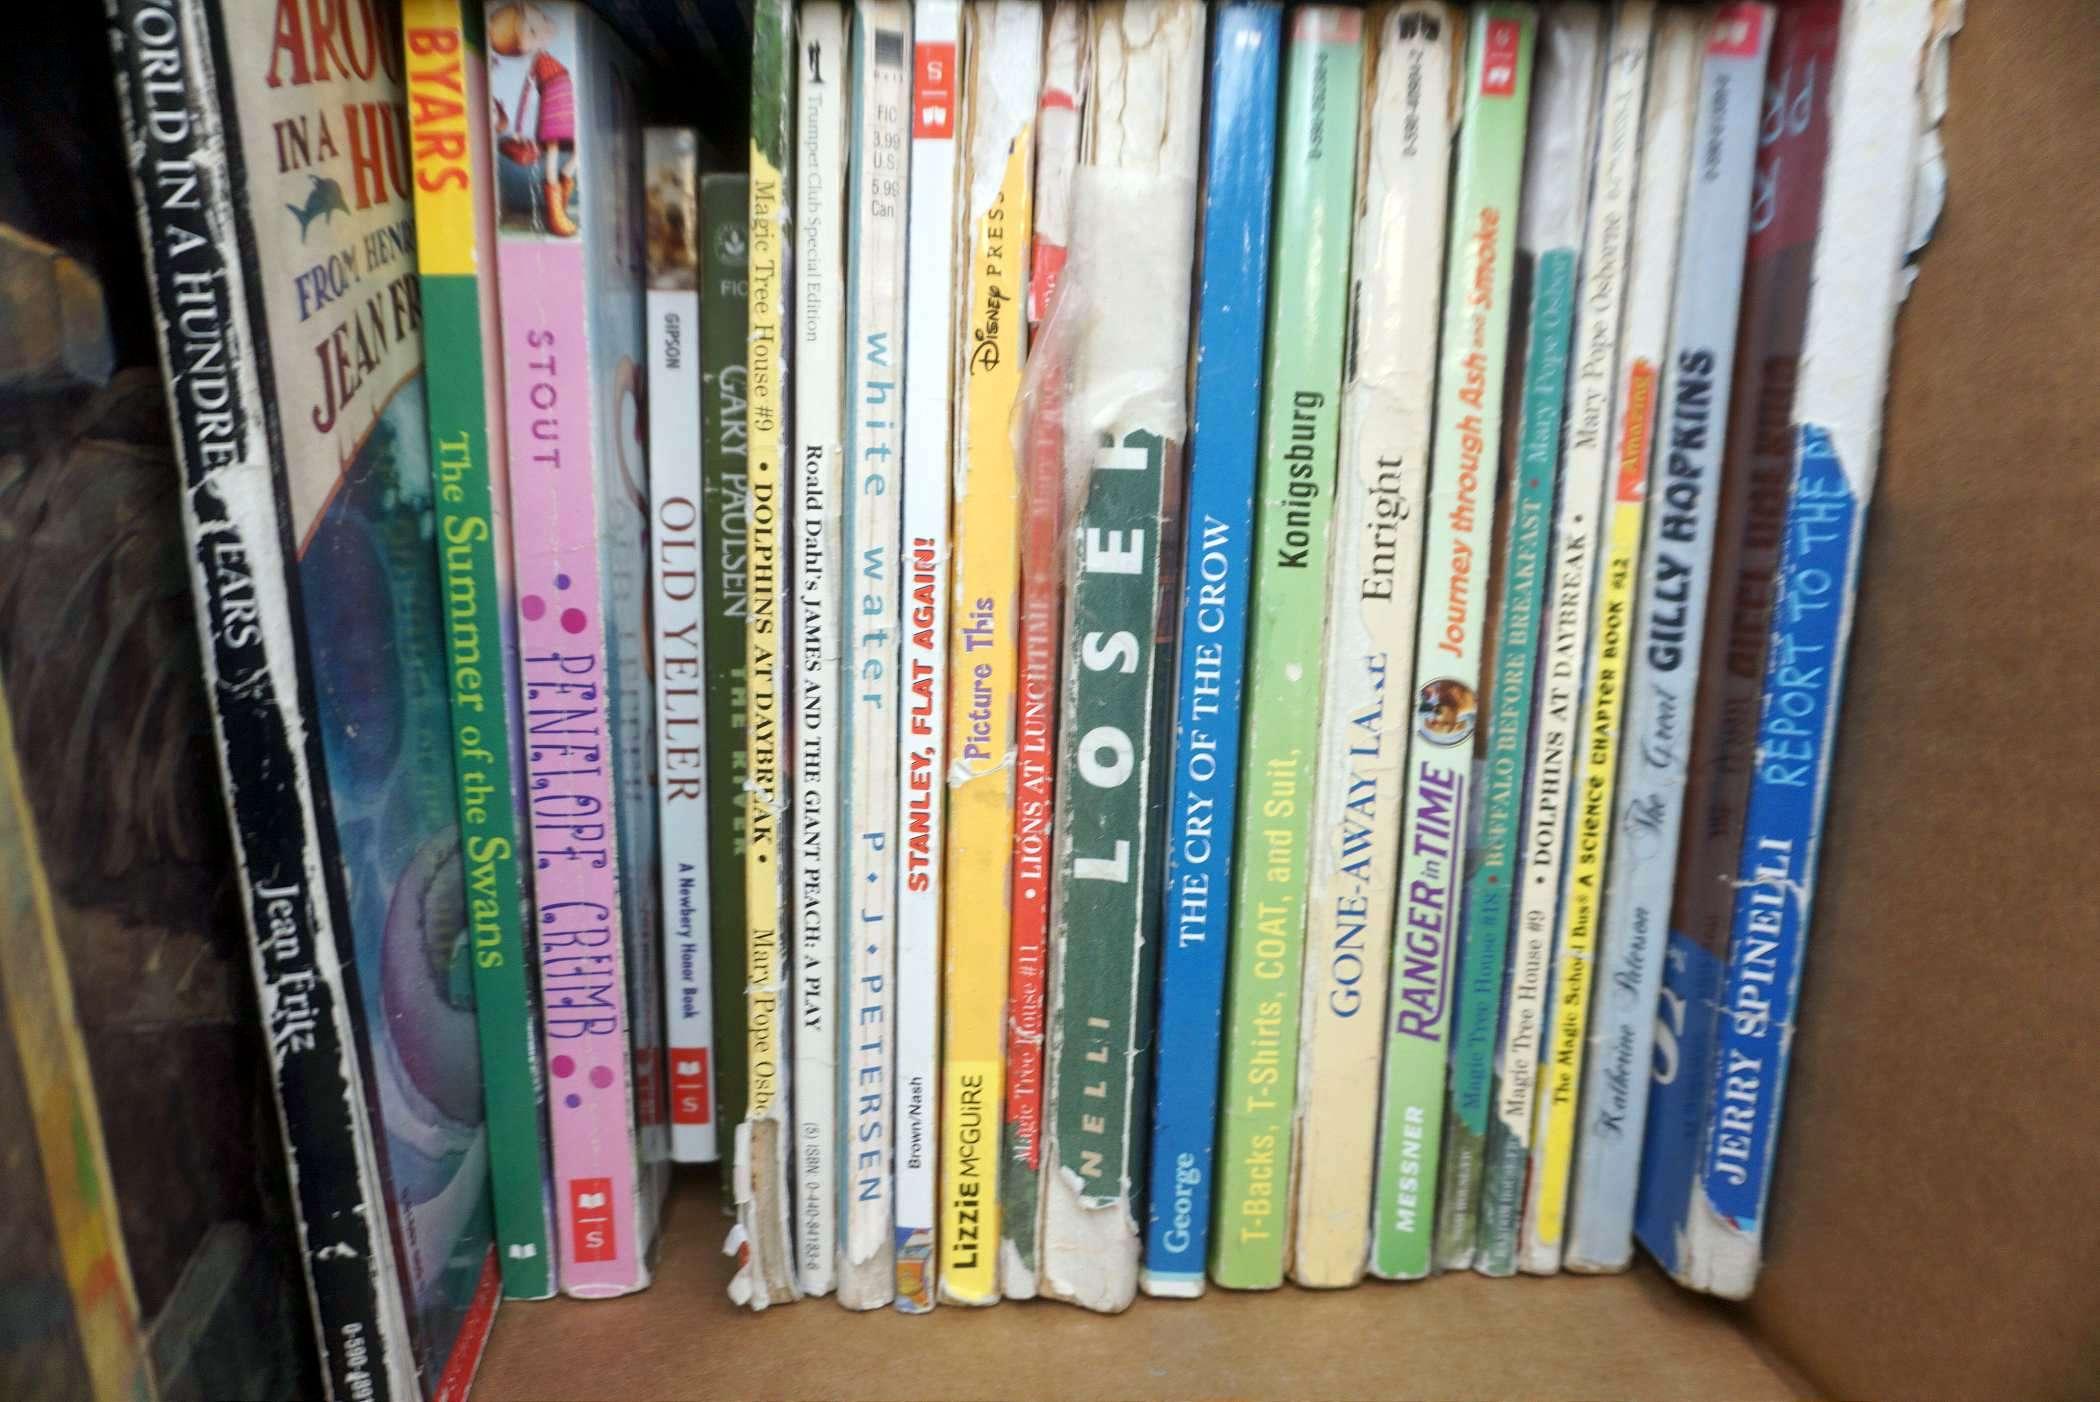 Assorted Chapter Books For Kids